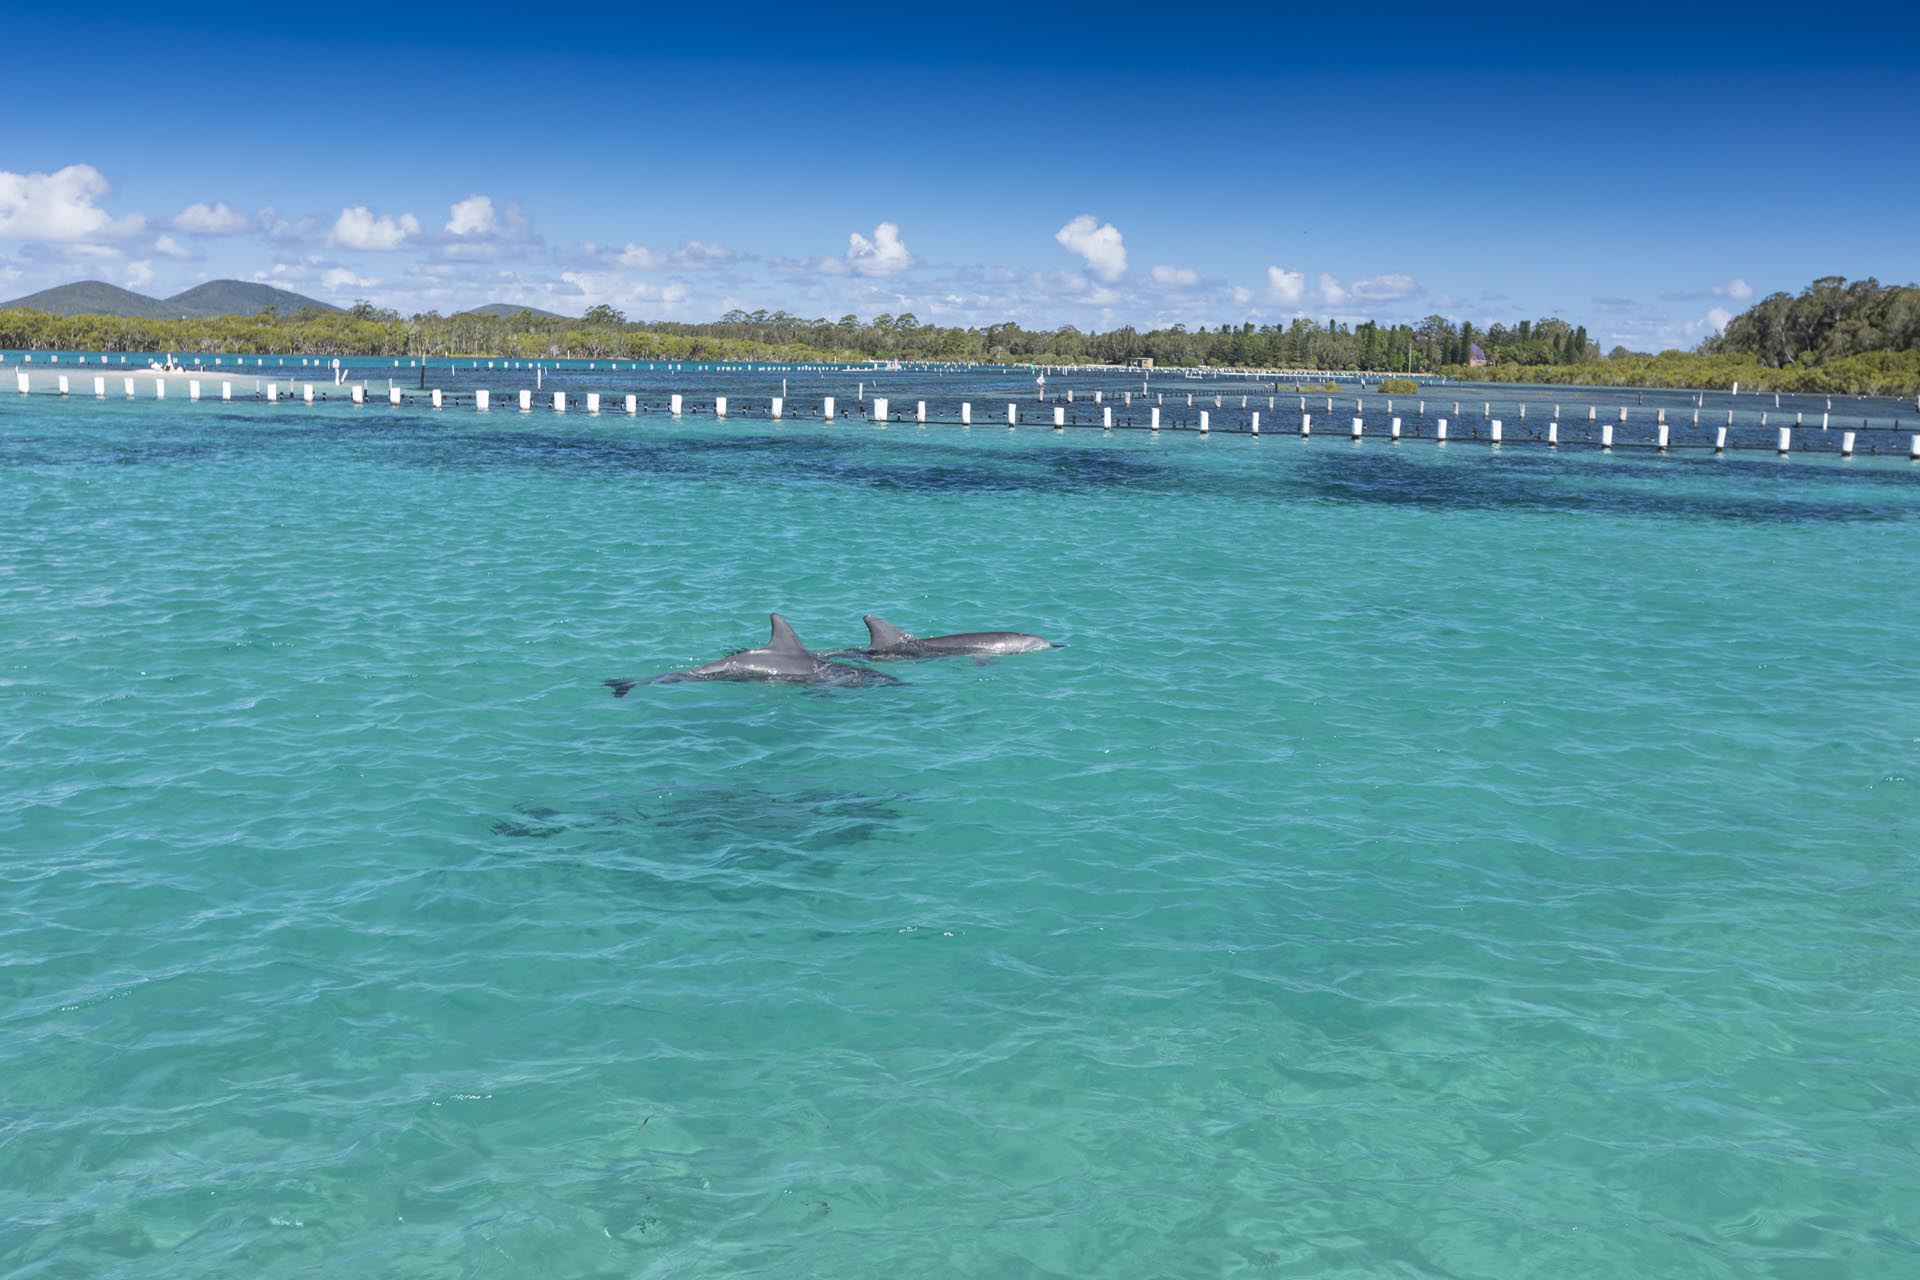 25. Dolphin watching near Hotel Forster